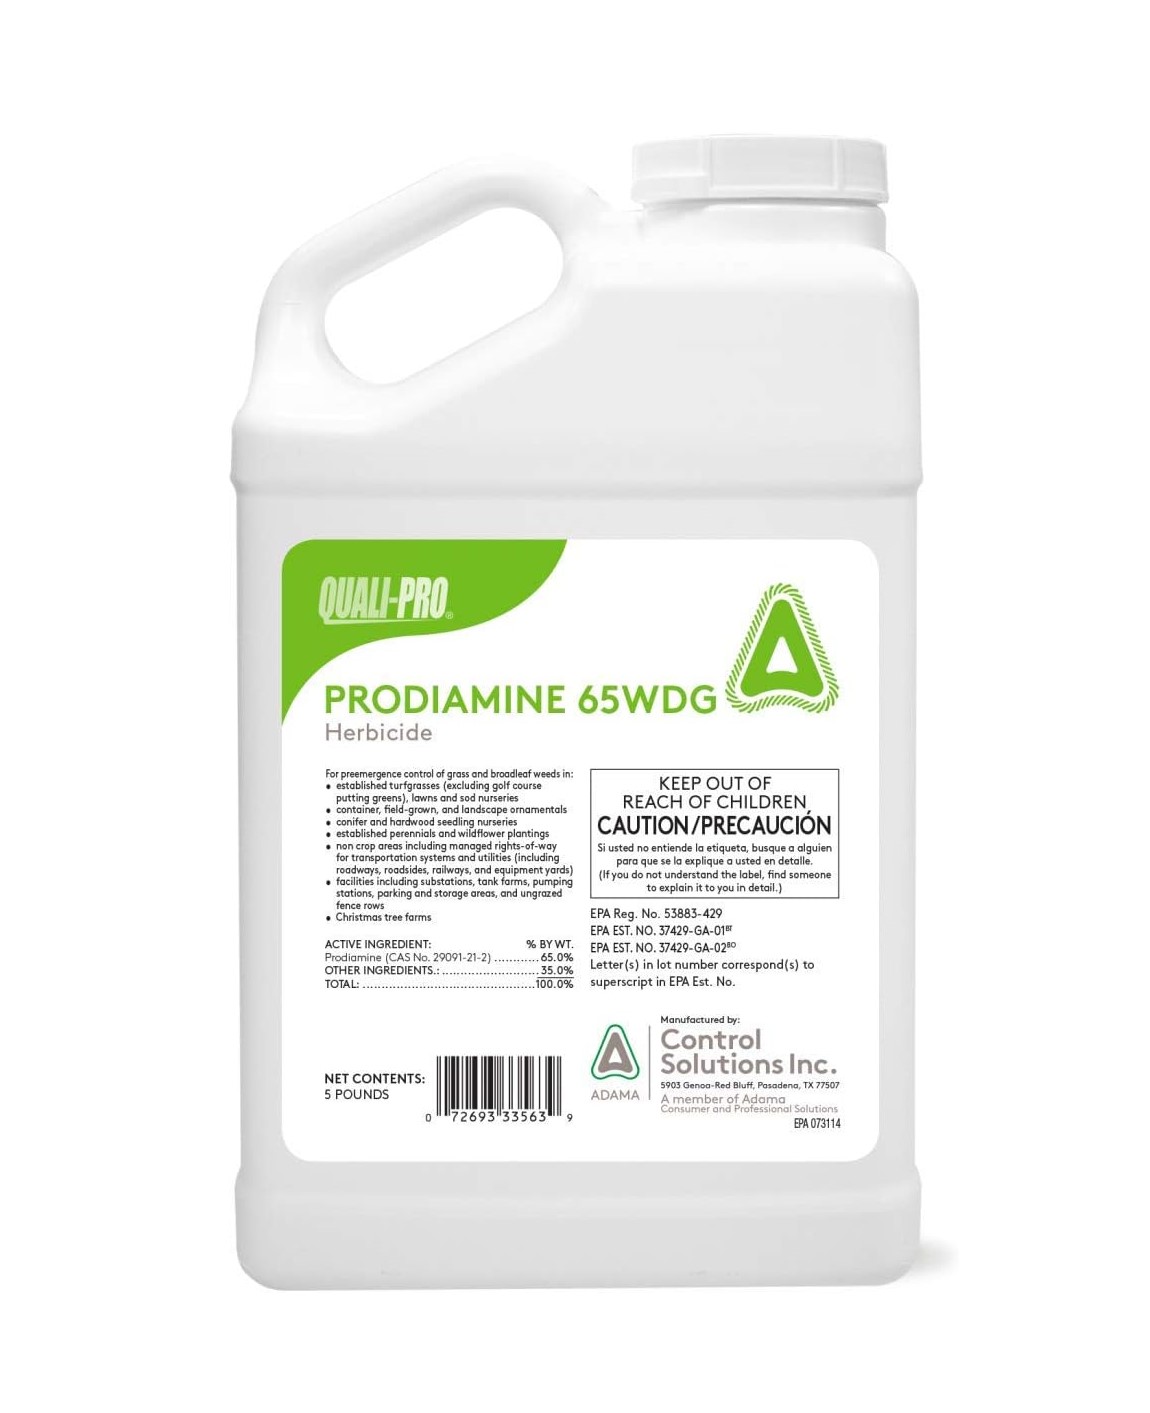 Quali-Pro Prodiamine 65 WDG Pre-Emergent Herbicide (Generic Barricade) - 5 Lbs Jug by Control Soultions - image 1 of 3